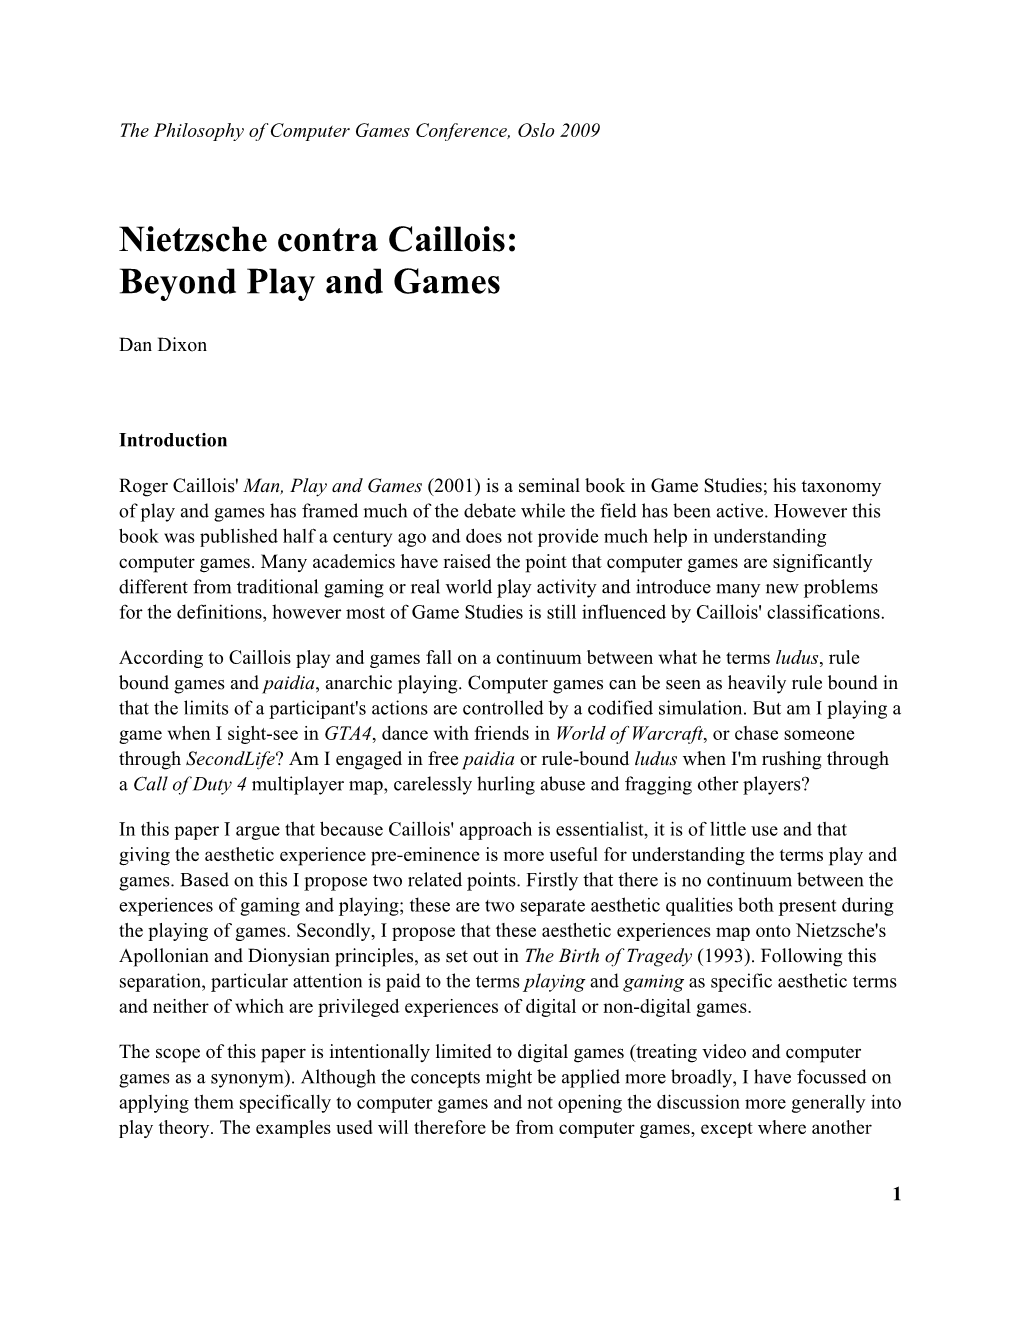 Nietzsche Contra Caillois Beyond Play and Games.Pdf